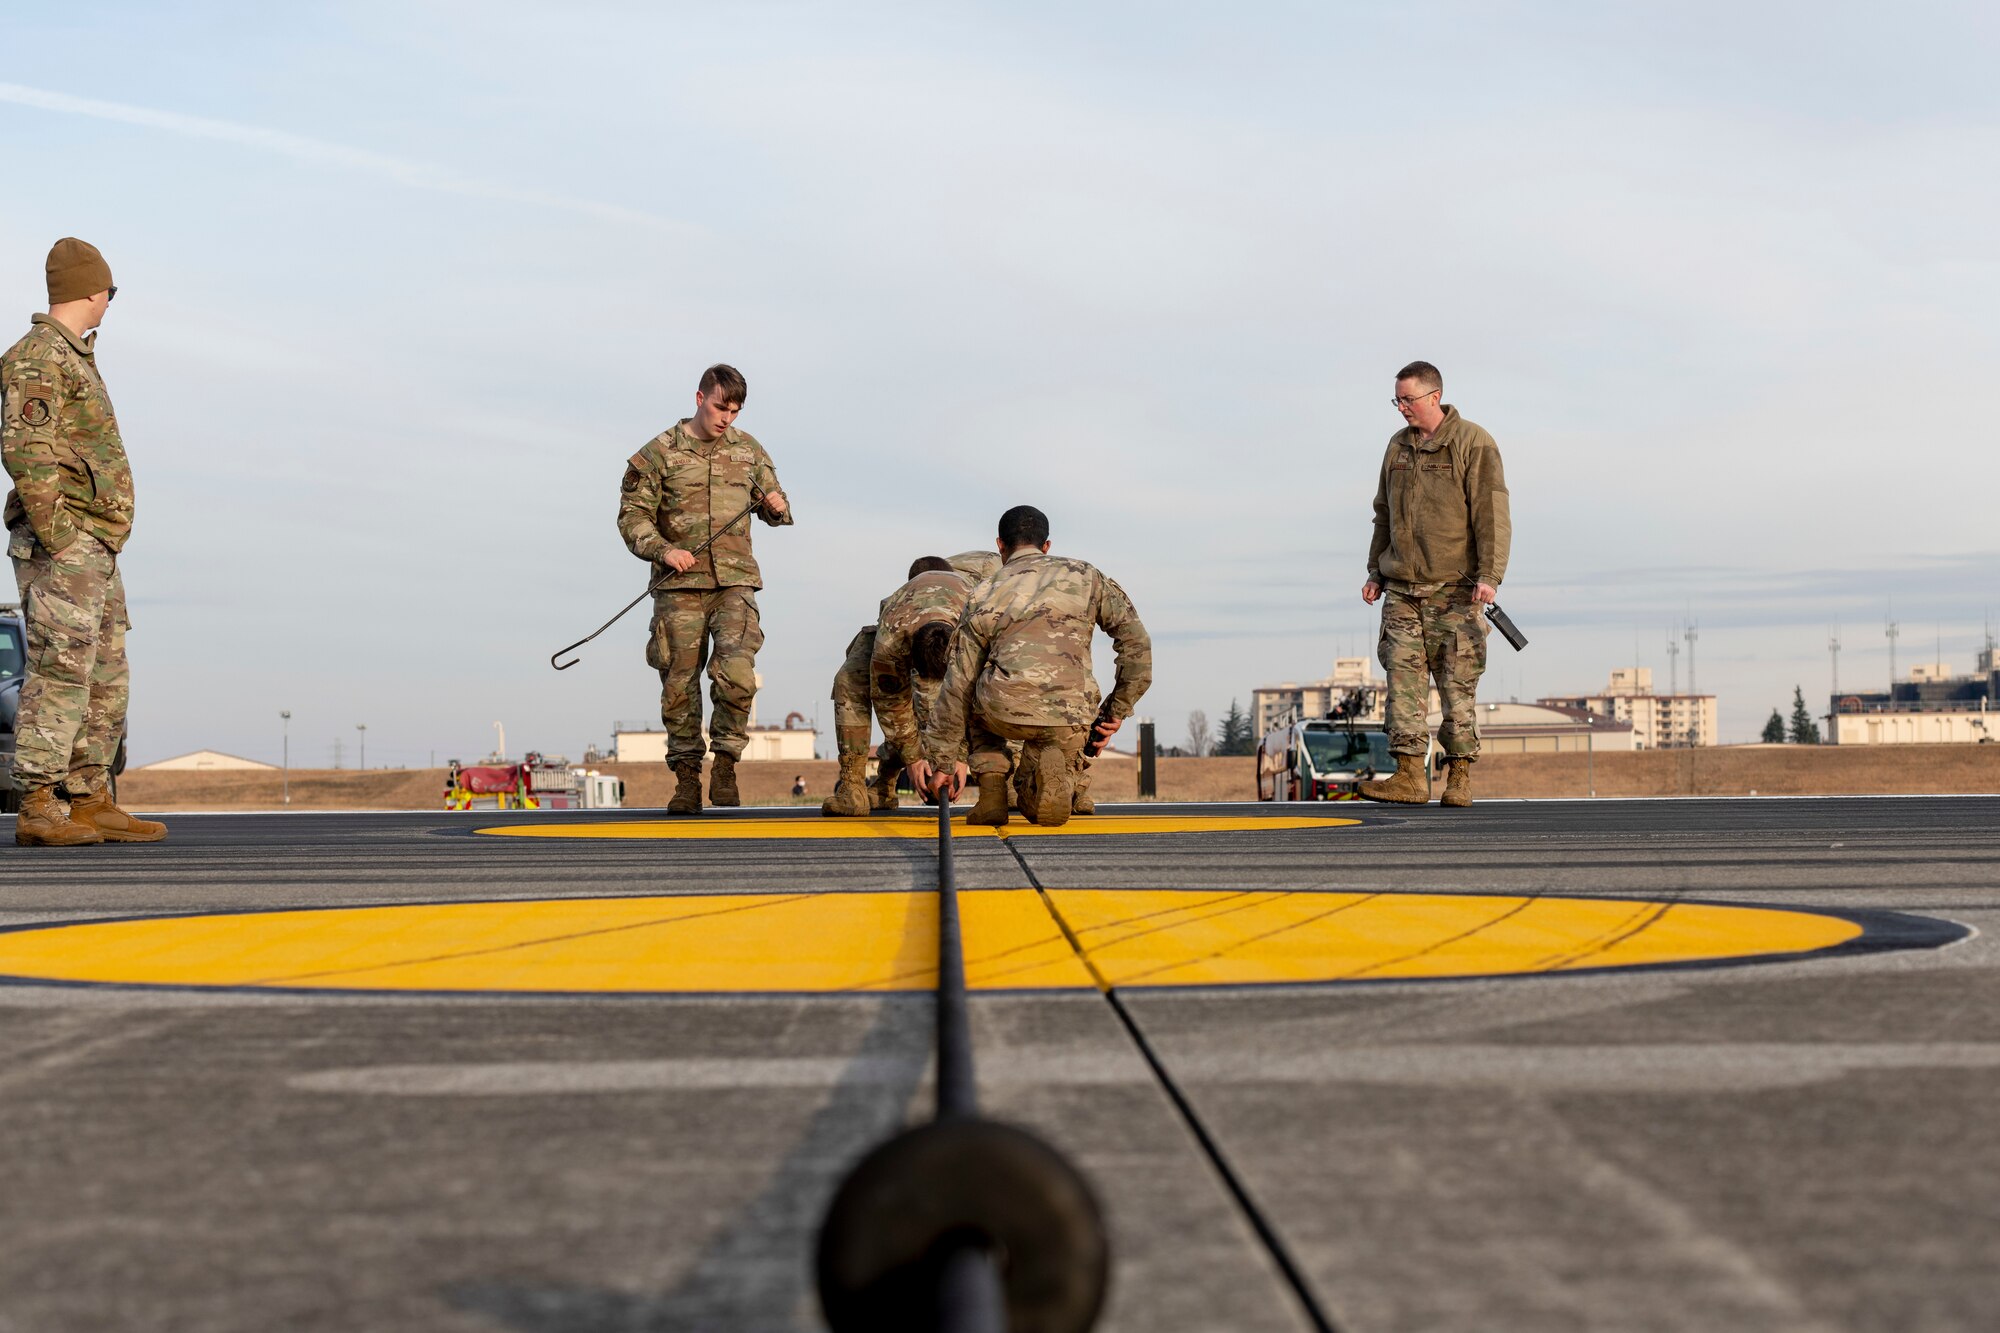 Airmen from the 374th Civil Engineer Squadron power production shop ensure the flightline Aircraft Arresting System (AAS) is set up properly for an annual certification test at Yokota Air Base, Japan, Jan. 6, 2023.